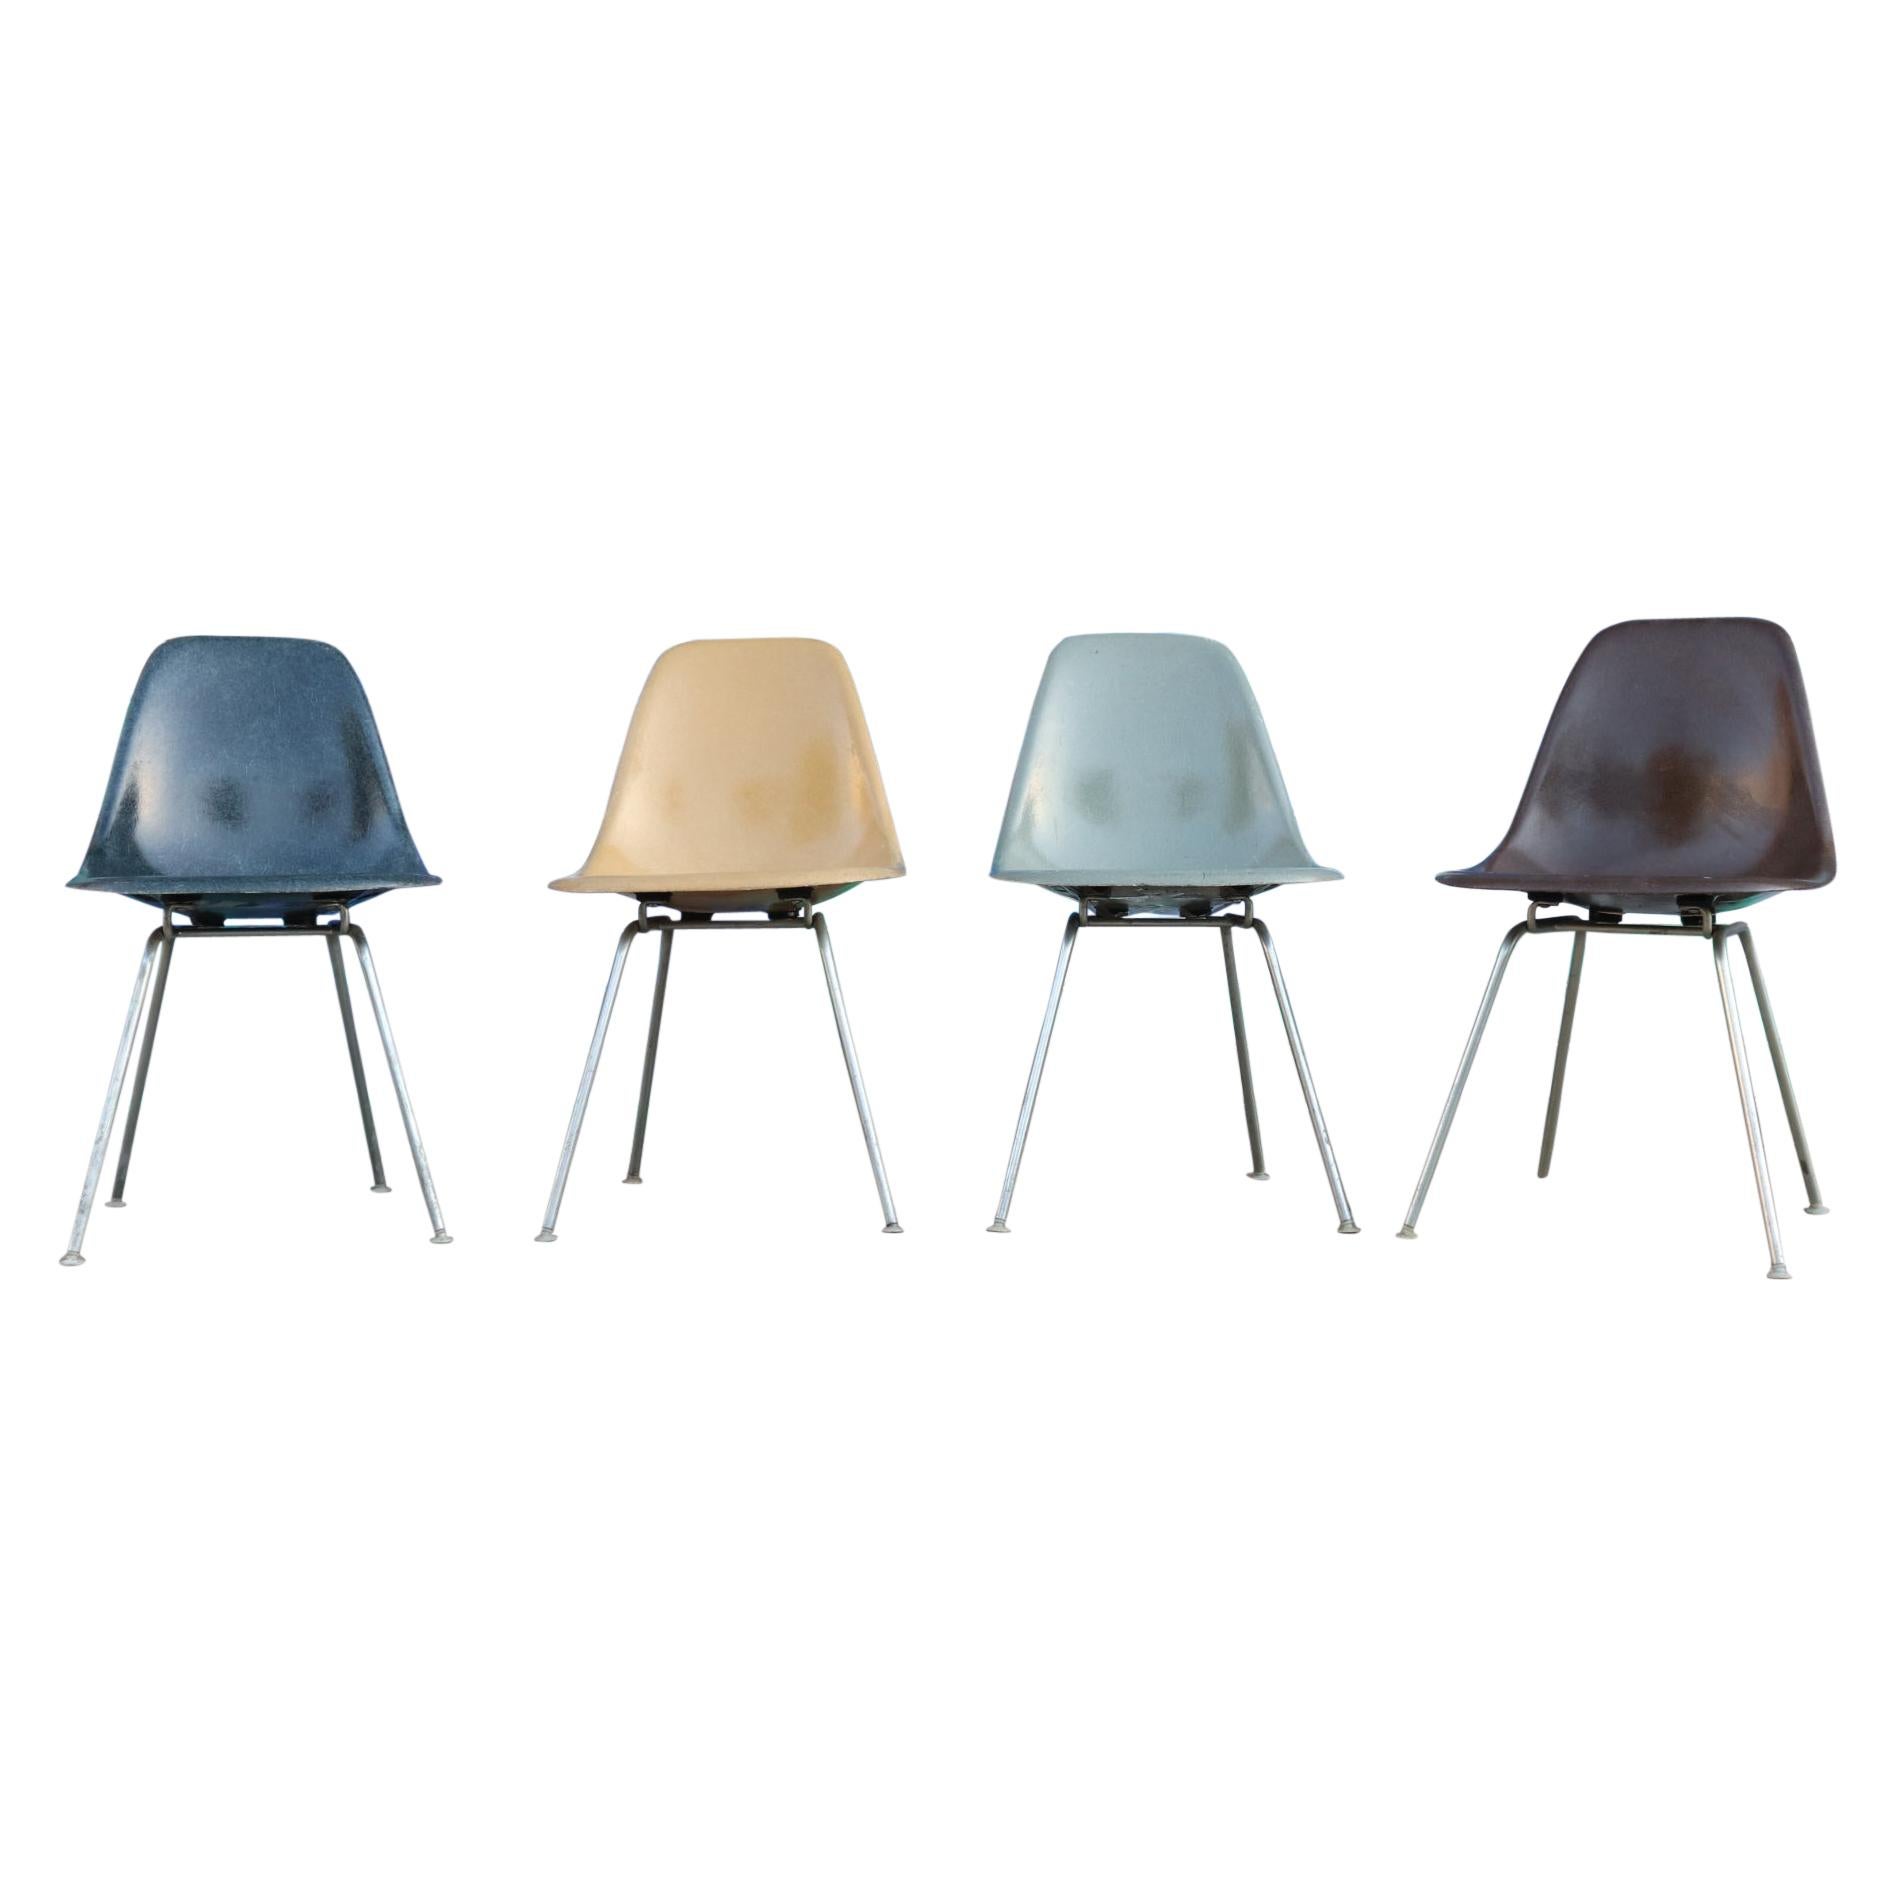 Herman Miller Eames Multicolored Dining Chair Set